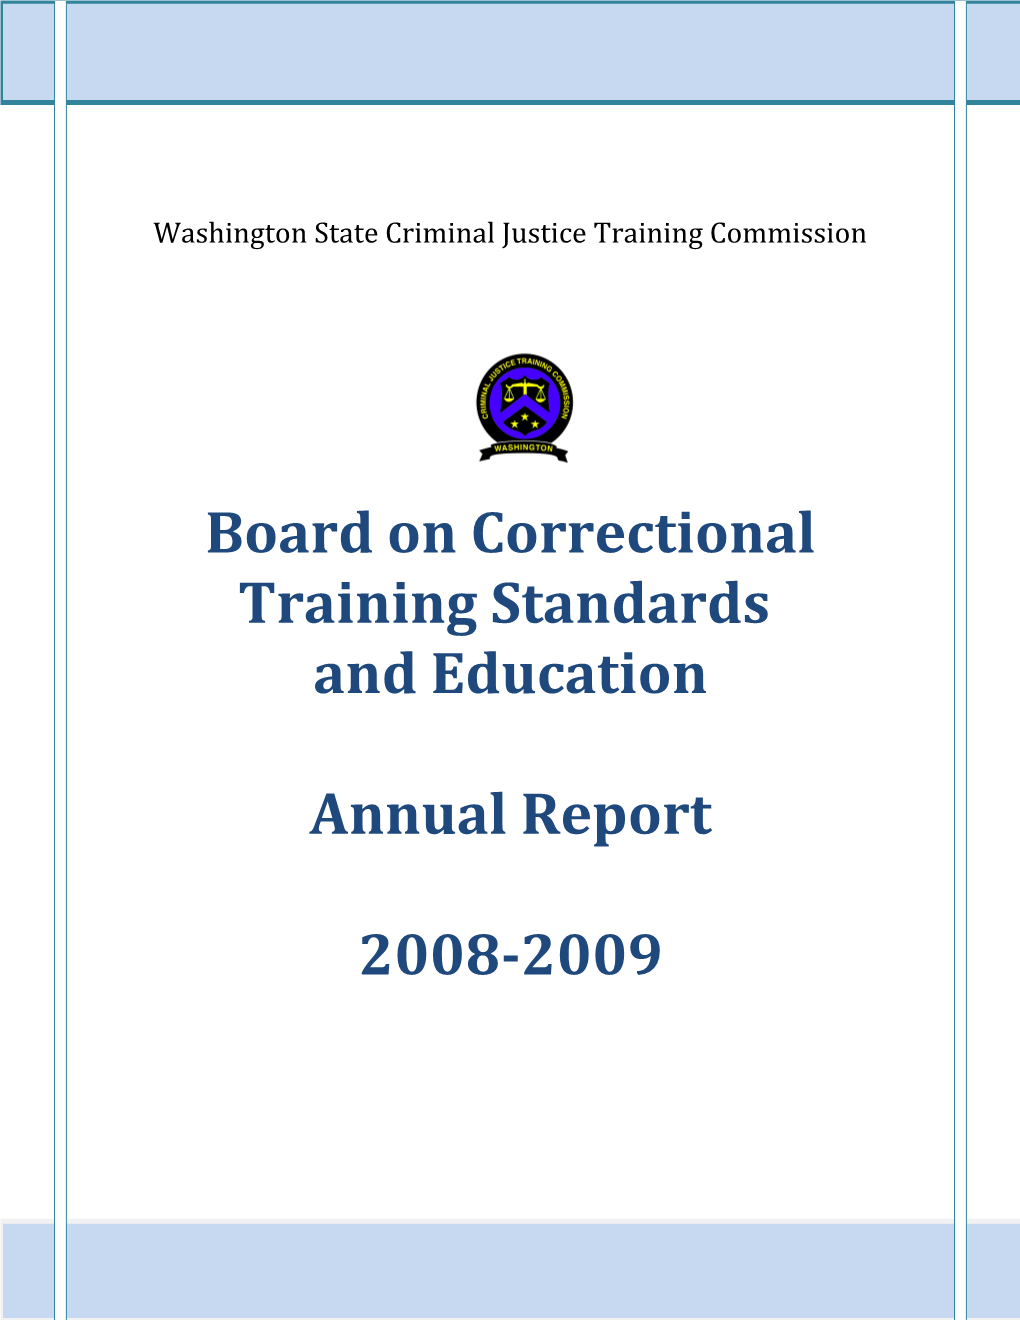 Board on Correctional Training Standards